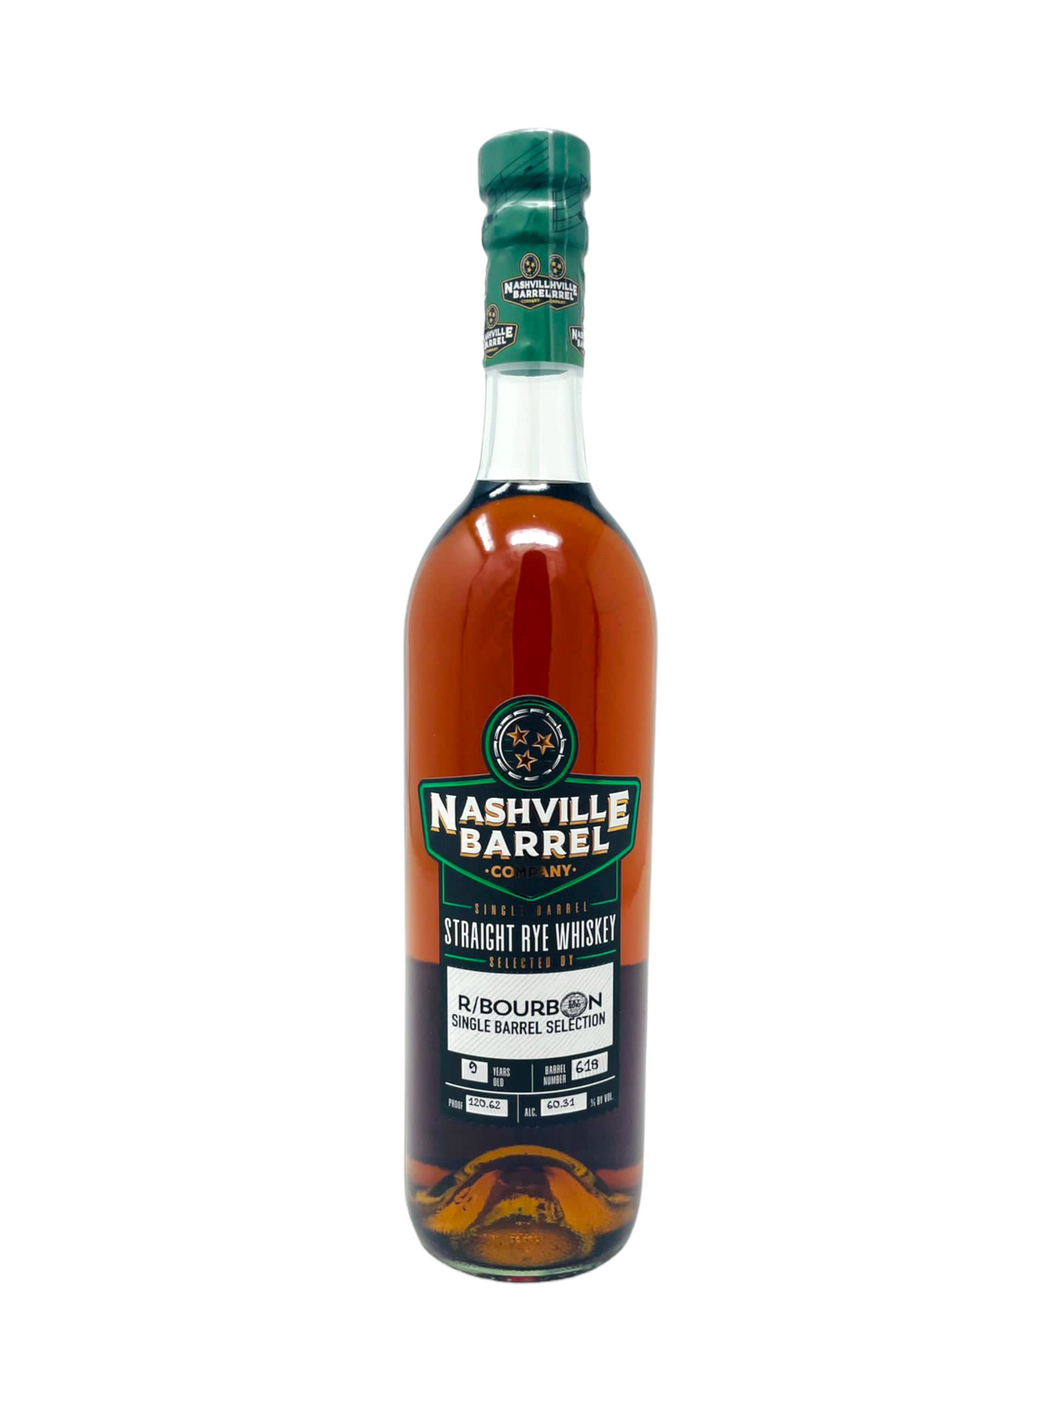 Nashville Barrel Co. #618 - 9 Year Rye 112.60 - Selected by R/Bourbon